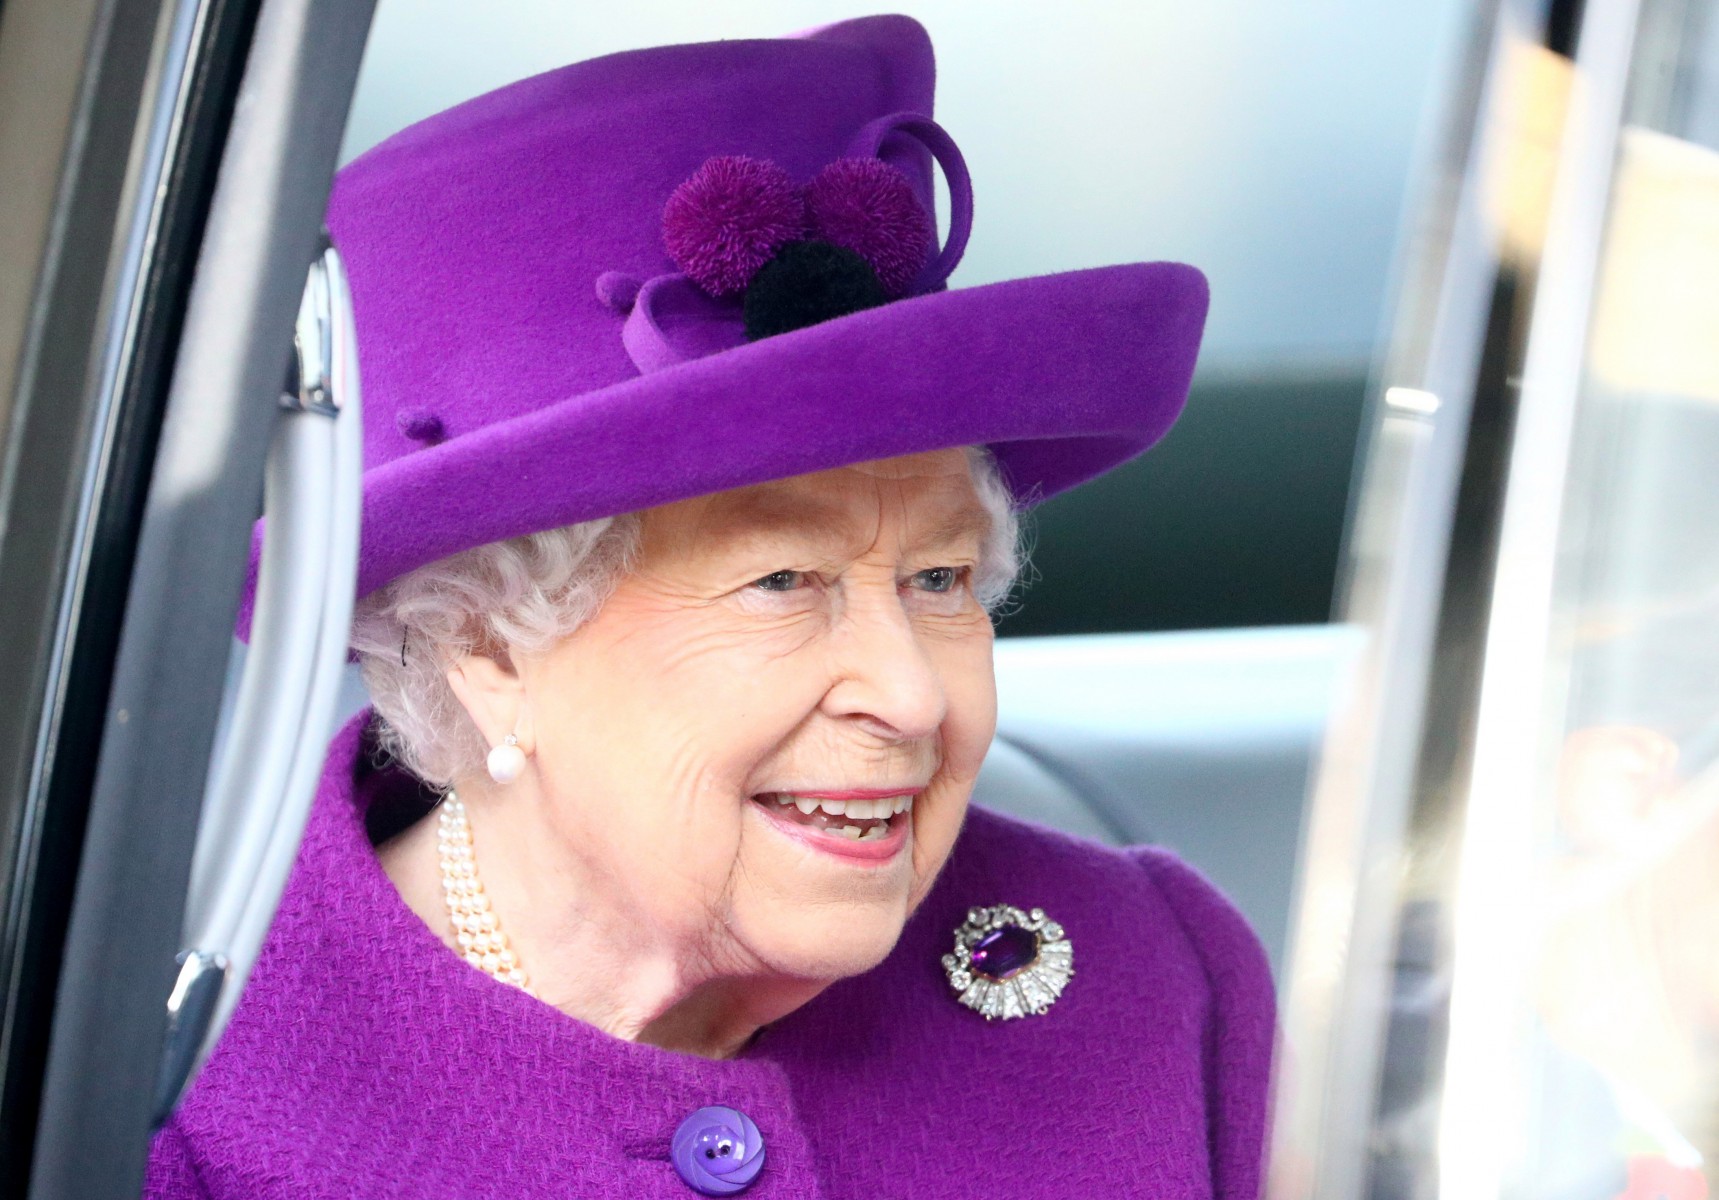 The Queen met with facility workers and veterans today